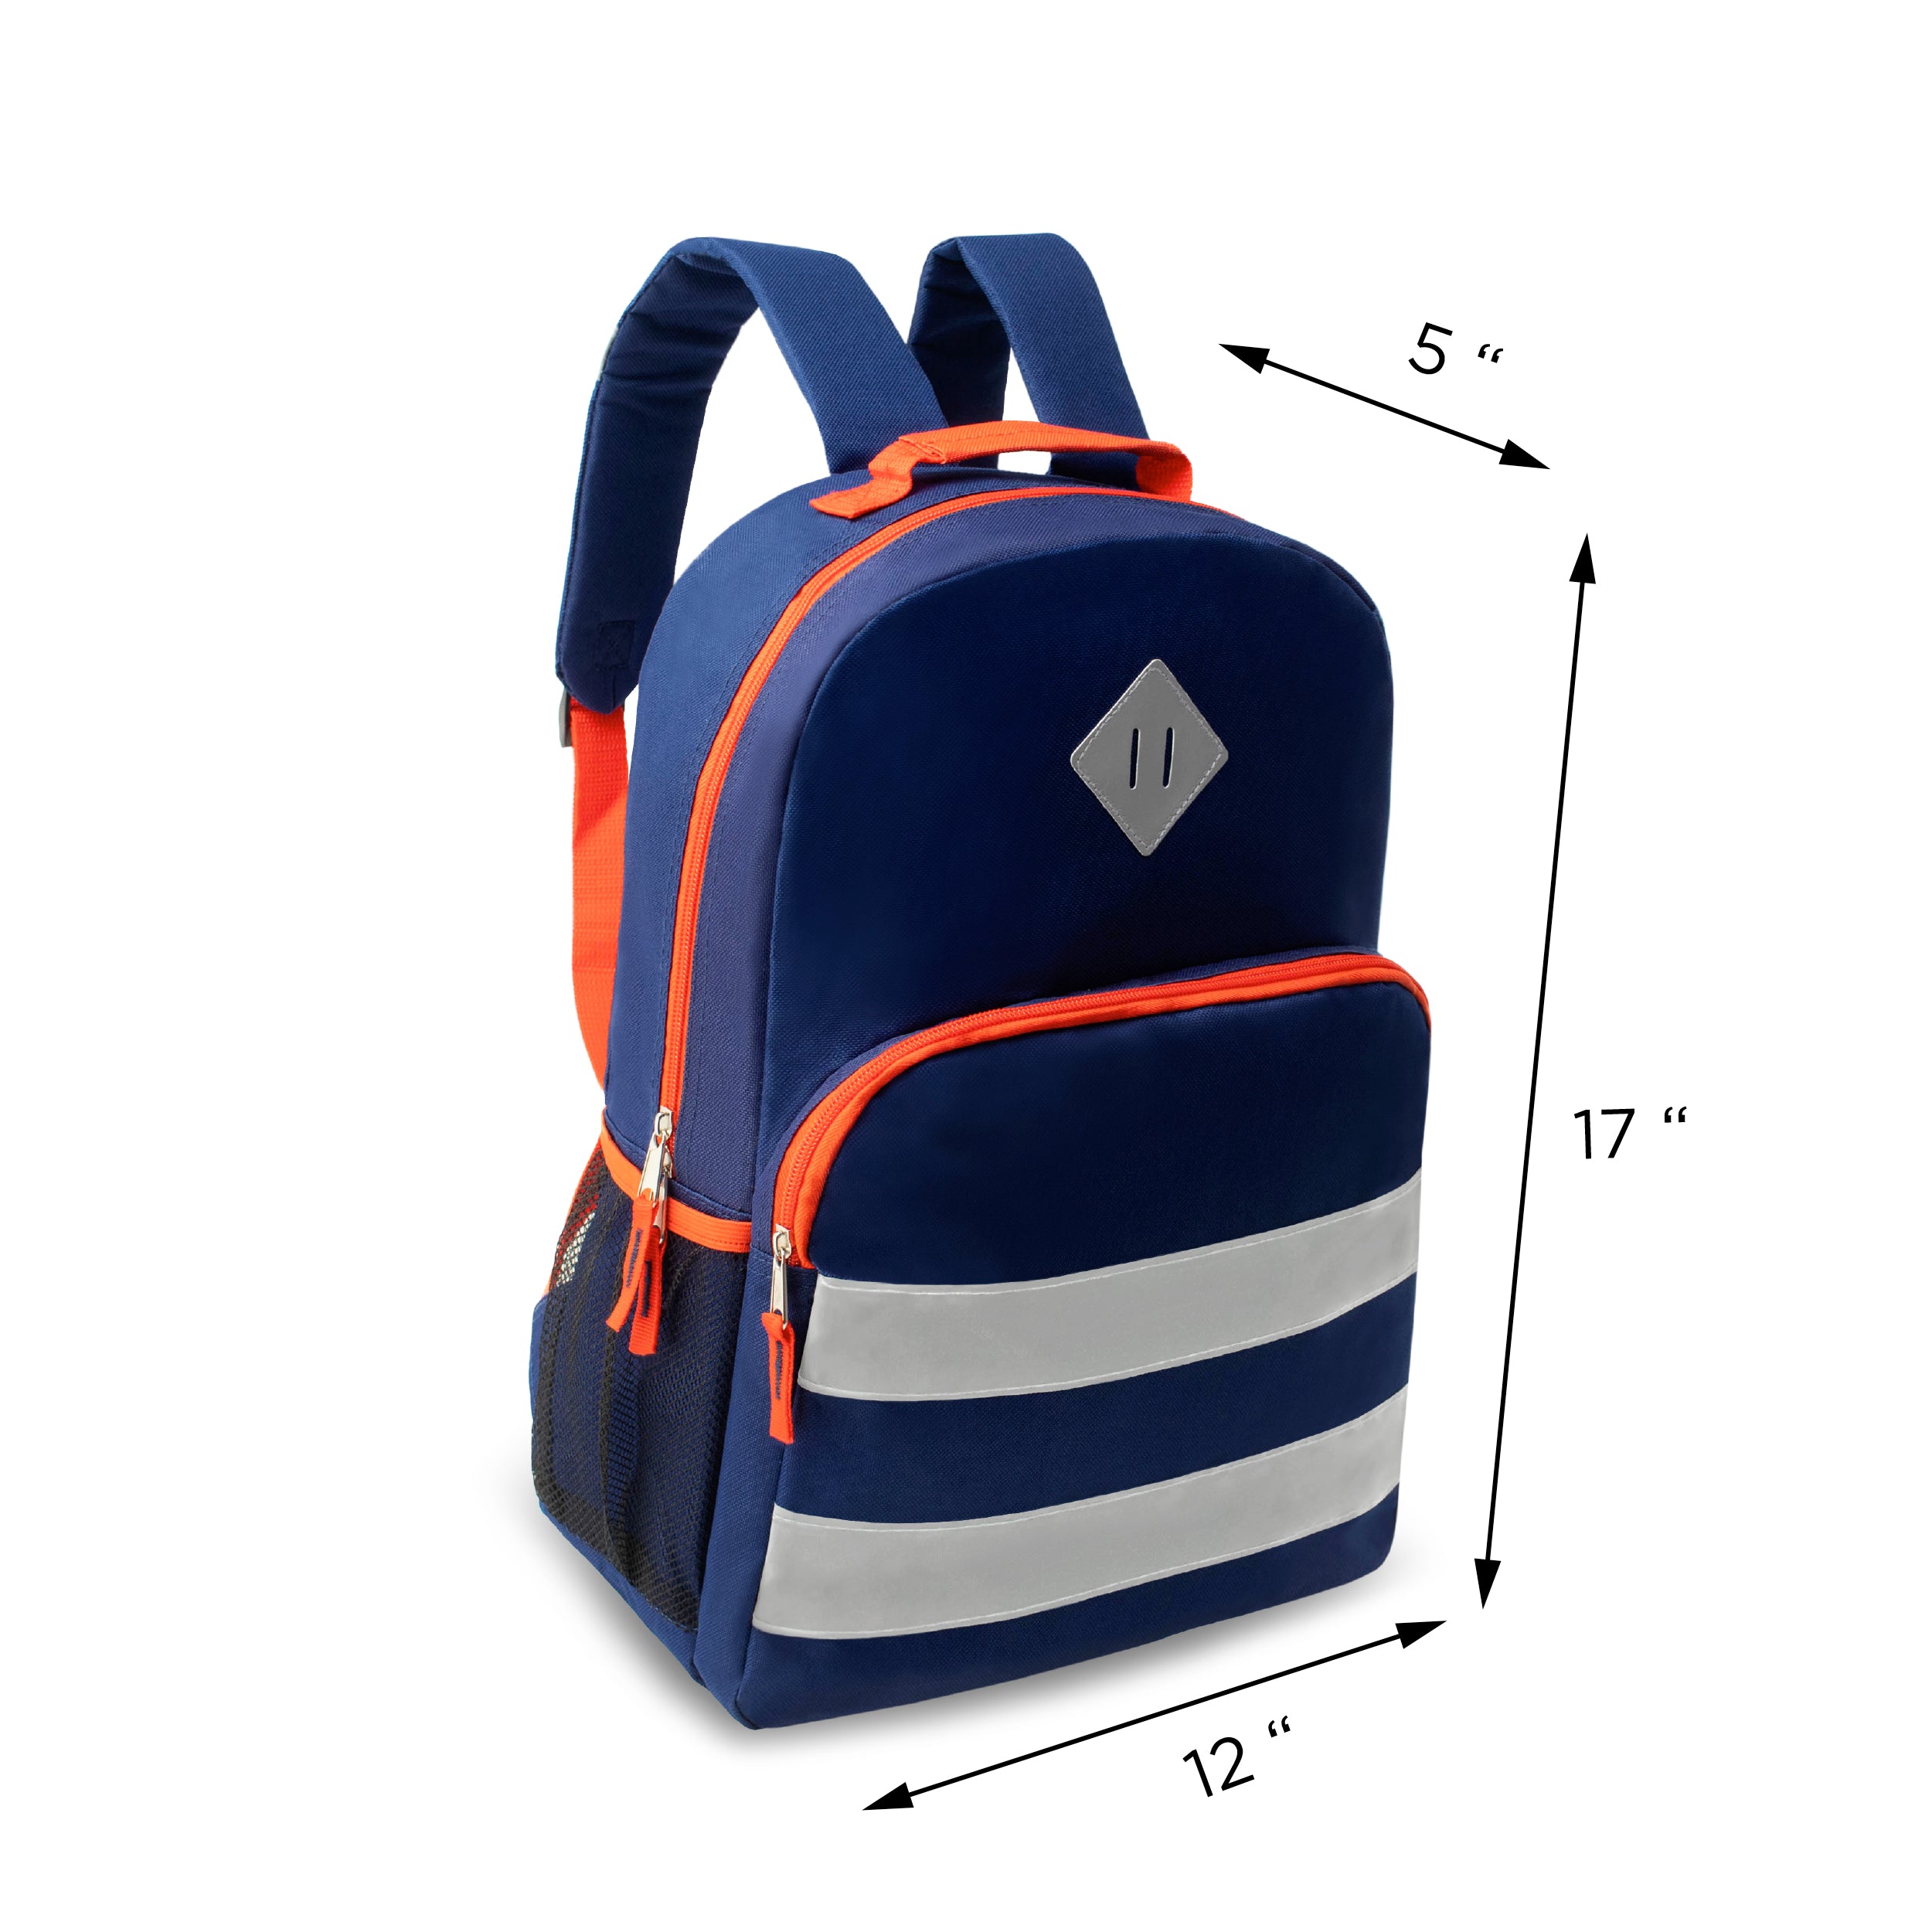 17 inch reflective wholesale backpacks for boys and girls